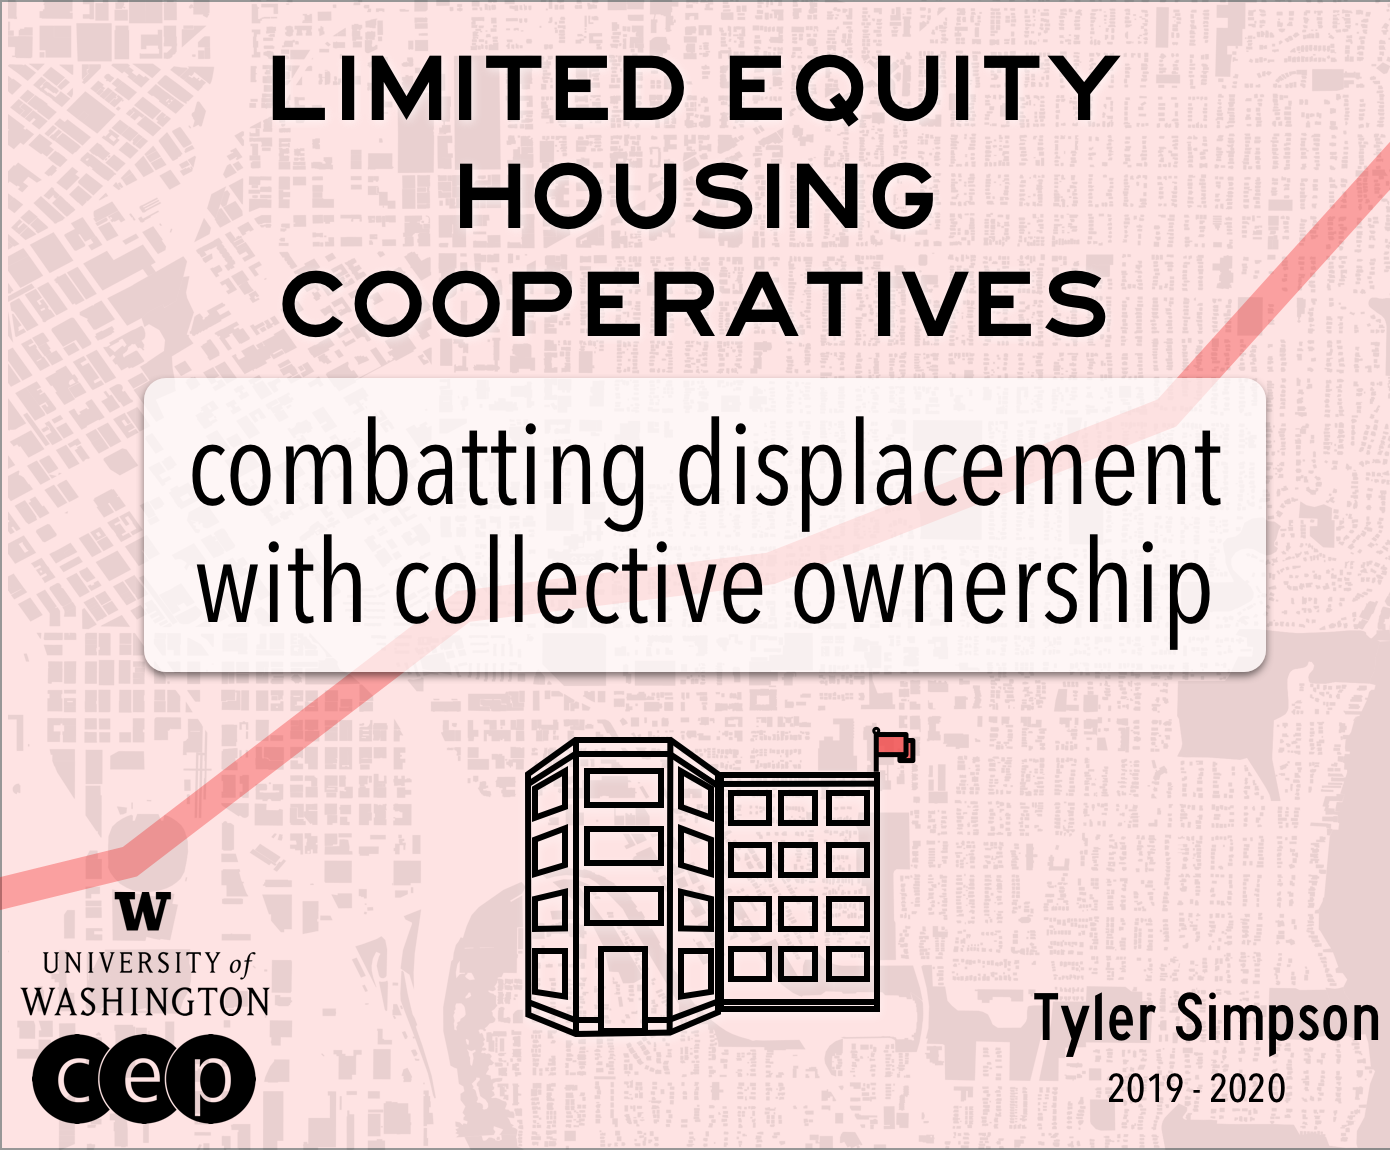 Limited Equity Housing Cooperatives thumbnail, 2019-2020, UW Seattle, Community Environment and Planning Program